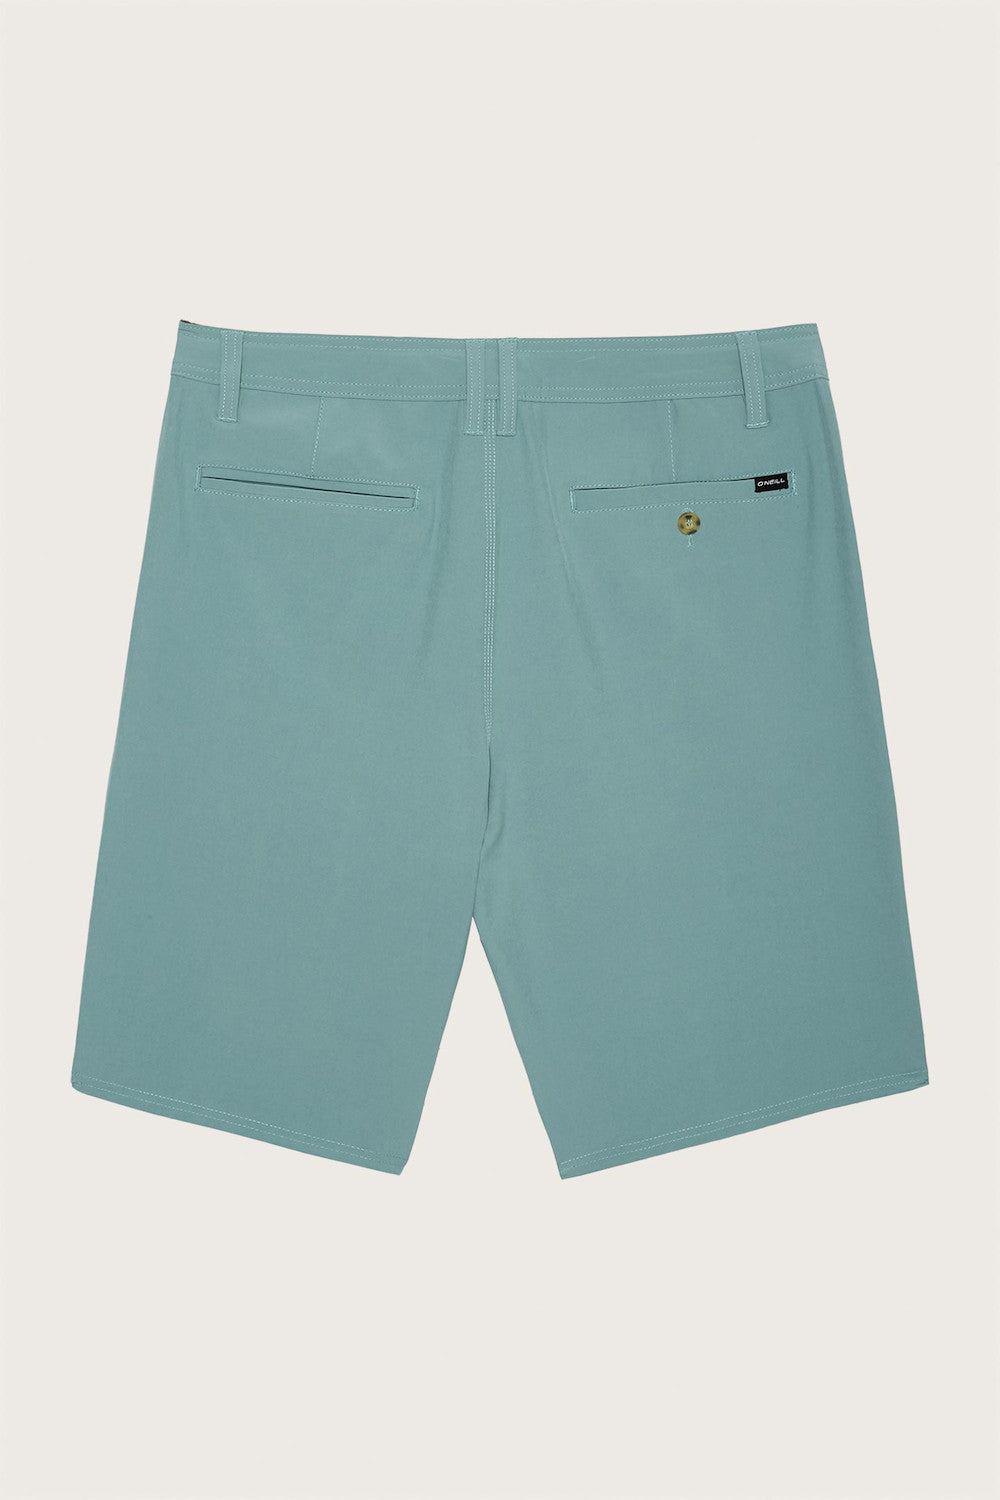 Oneill Reserve Solid 19" Hybrid Shorts - Lincoln Mens Shorts